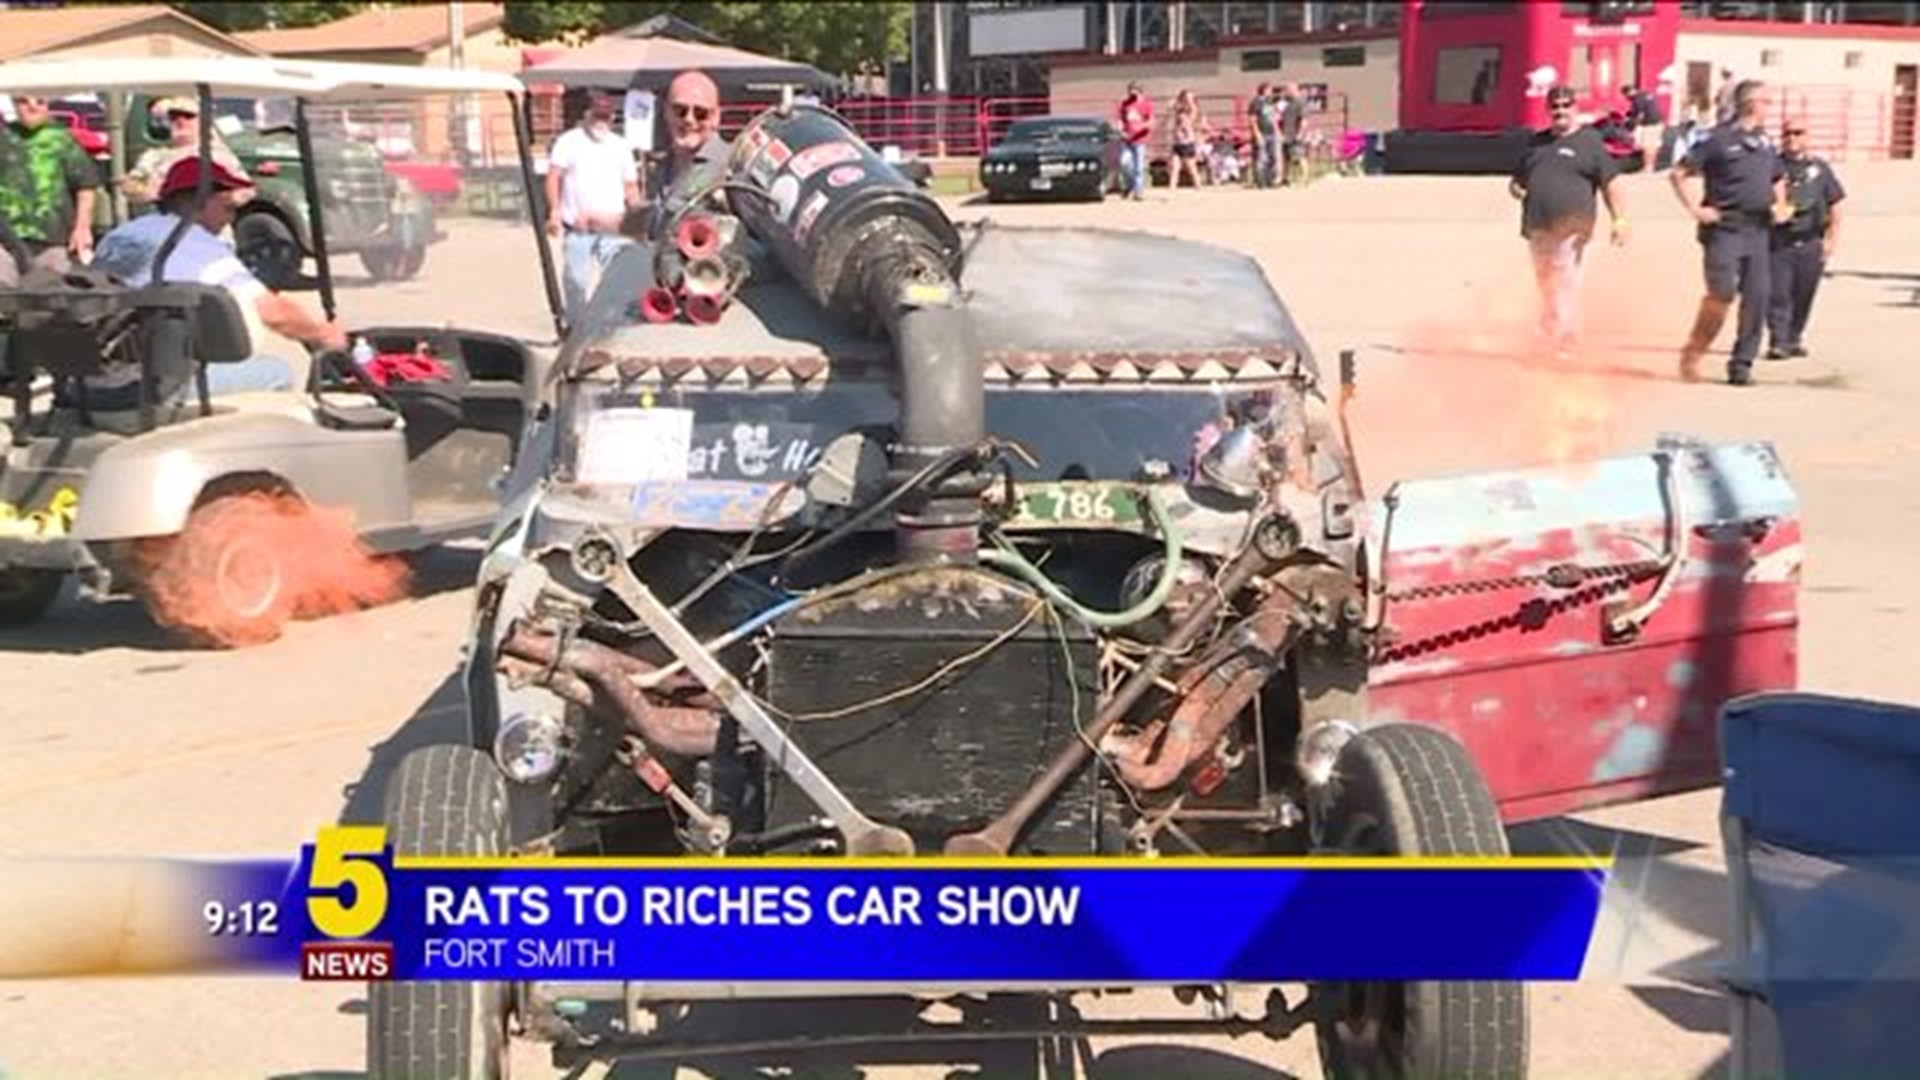 Rats To Riches Car Show